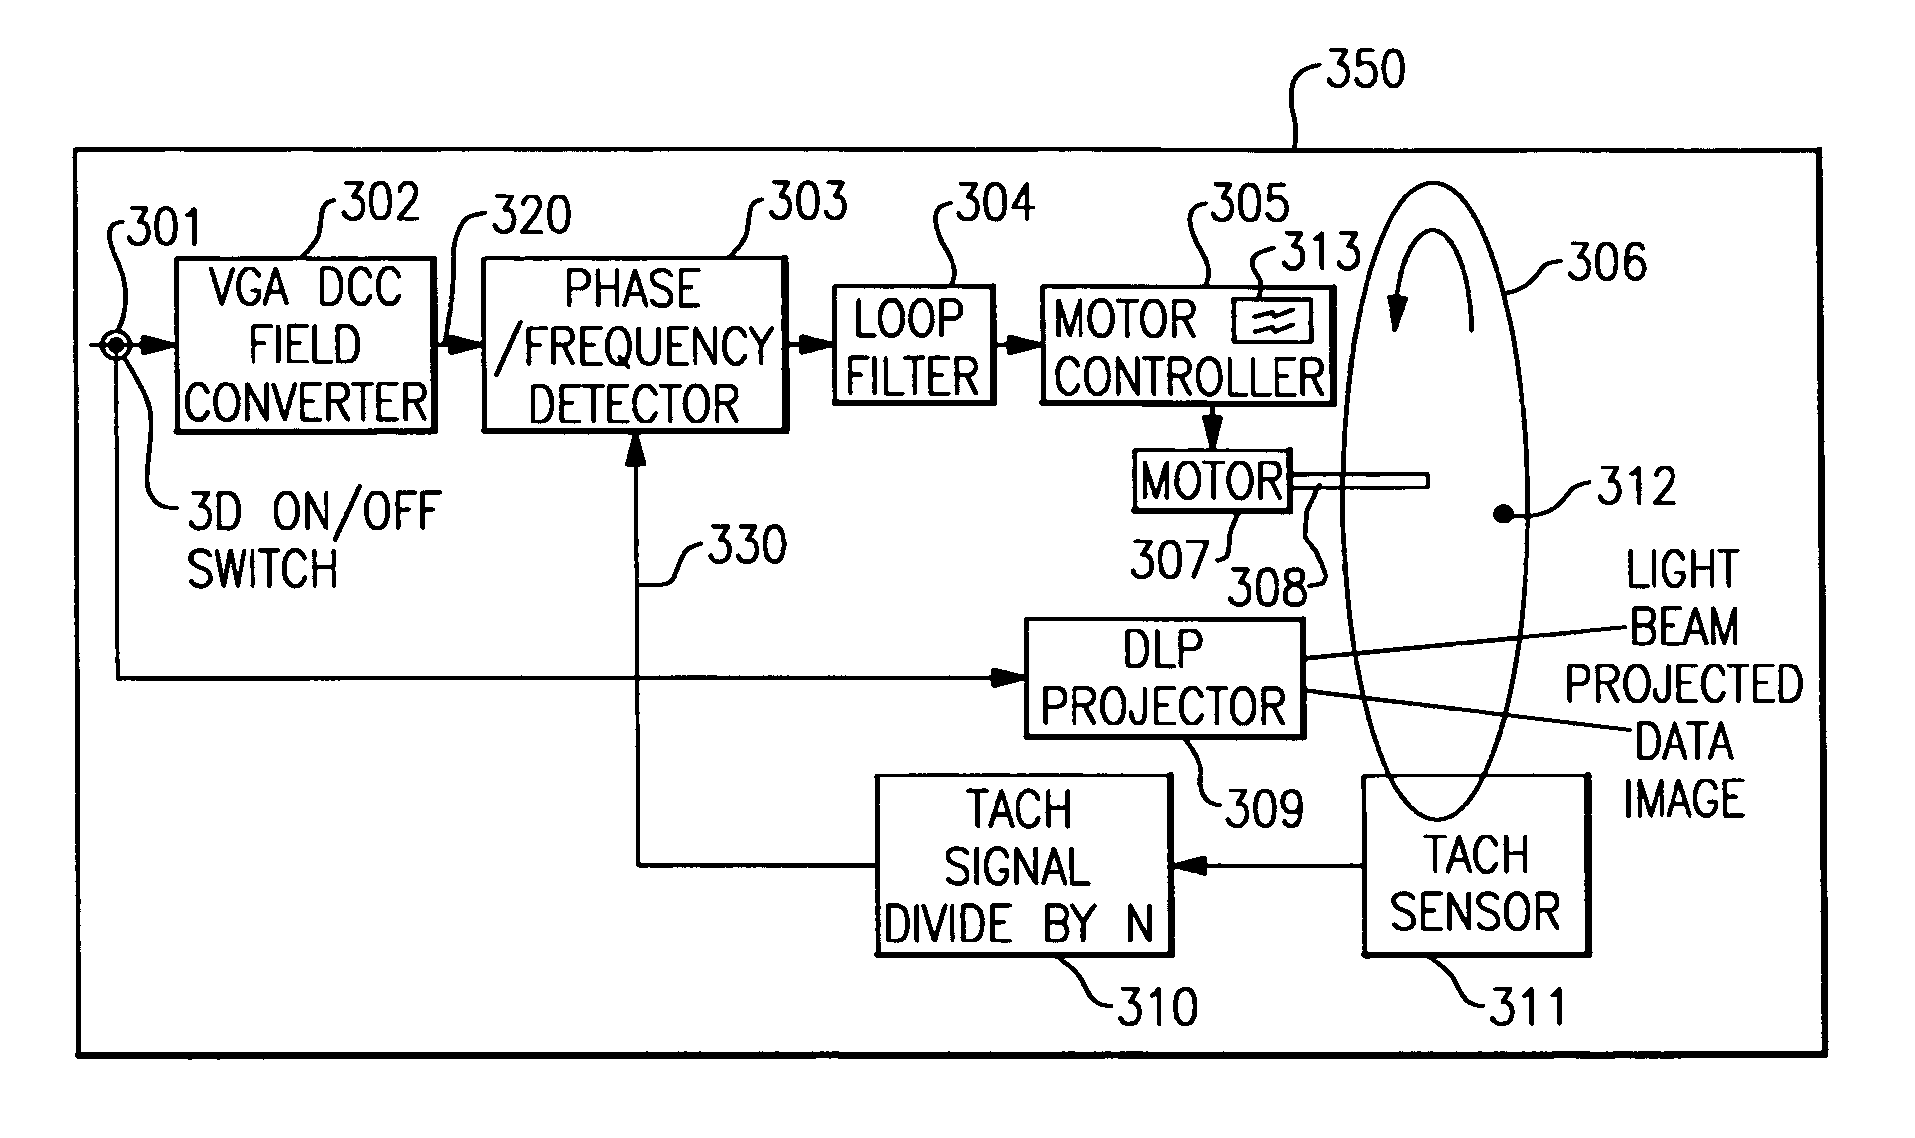 Method and system for synchronizing opto-mechanical filters to a series of video synchronization pulses and derivatives thereof